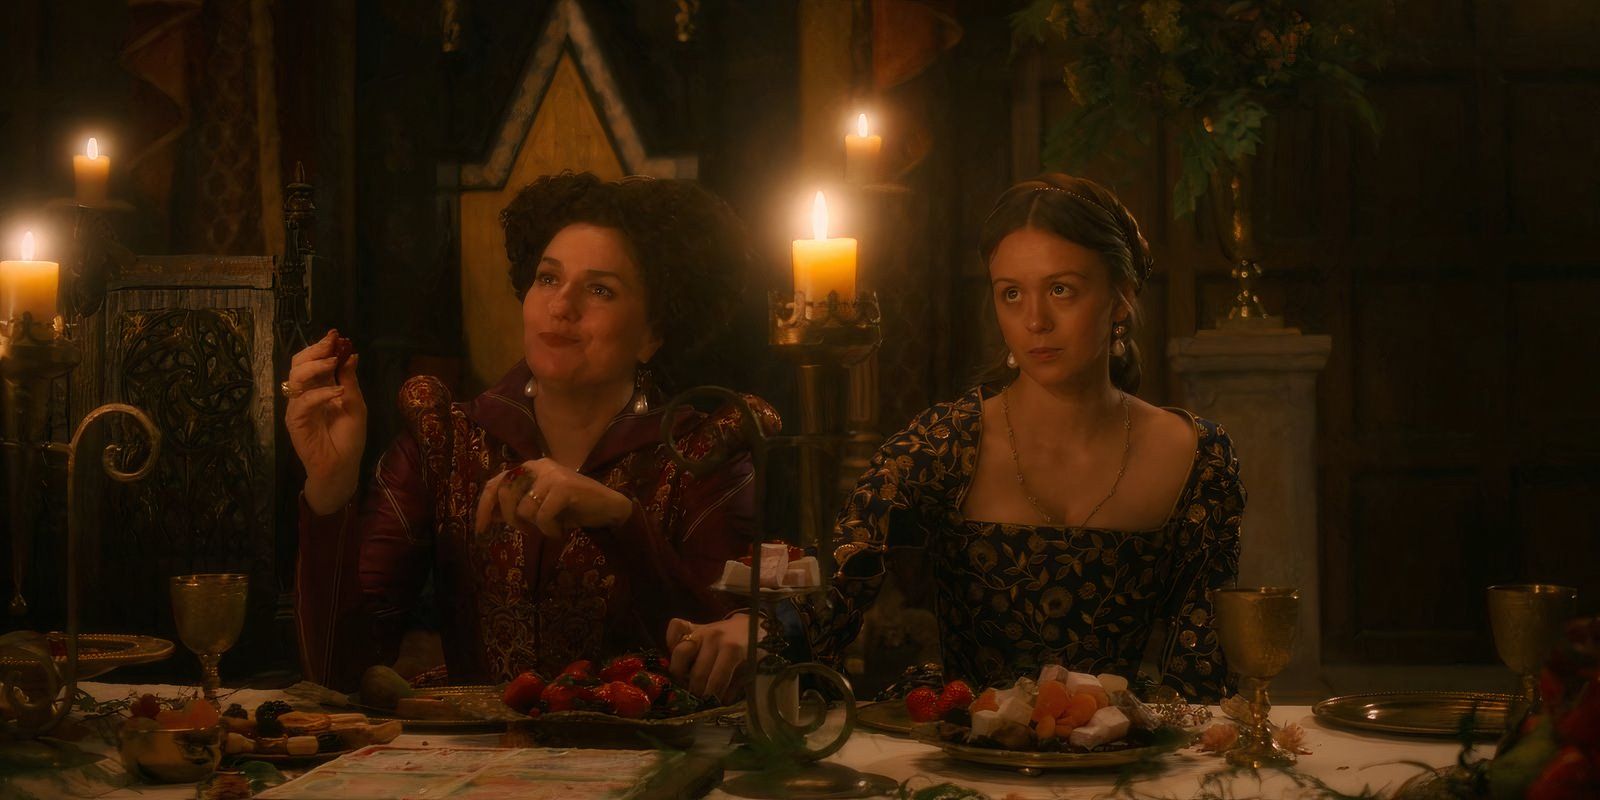 Katherine and Lady Frances in My Lady Jane